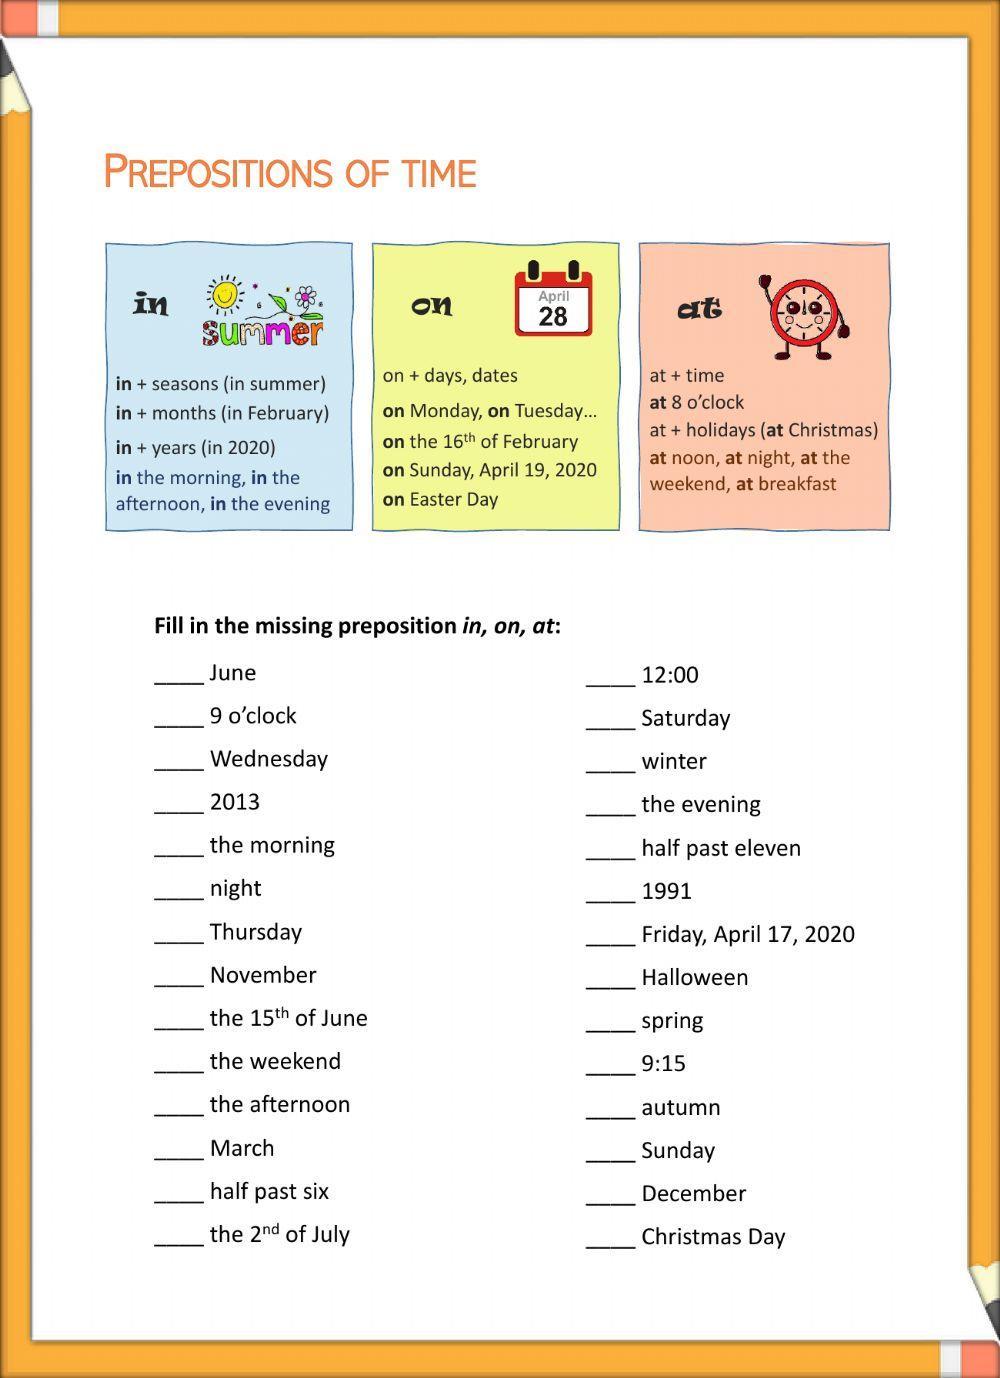 Prepositions in, on, at